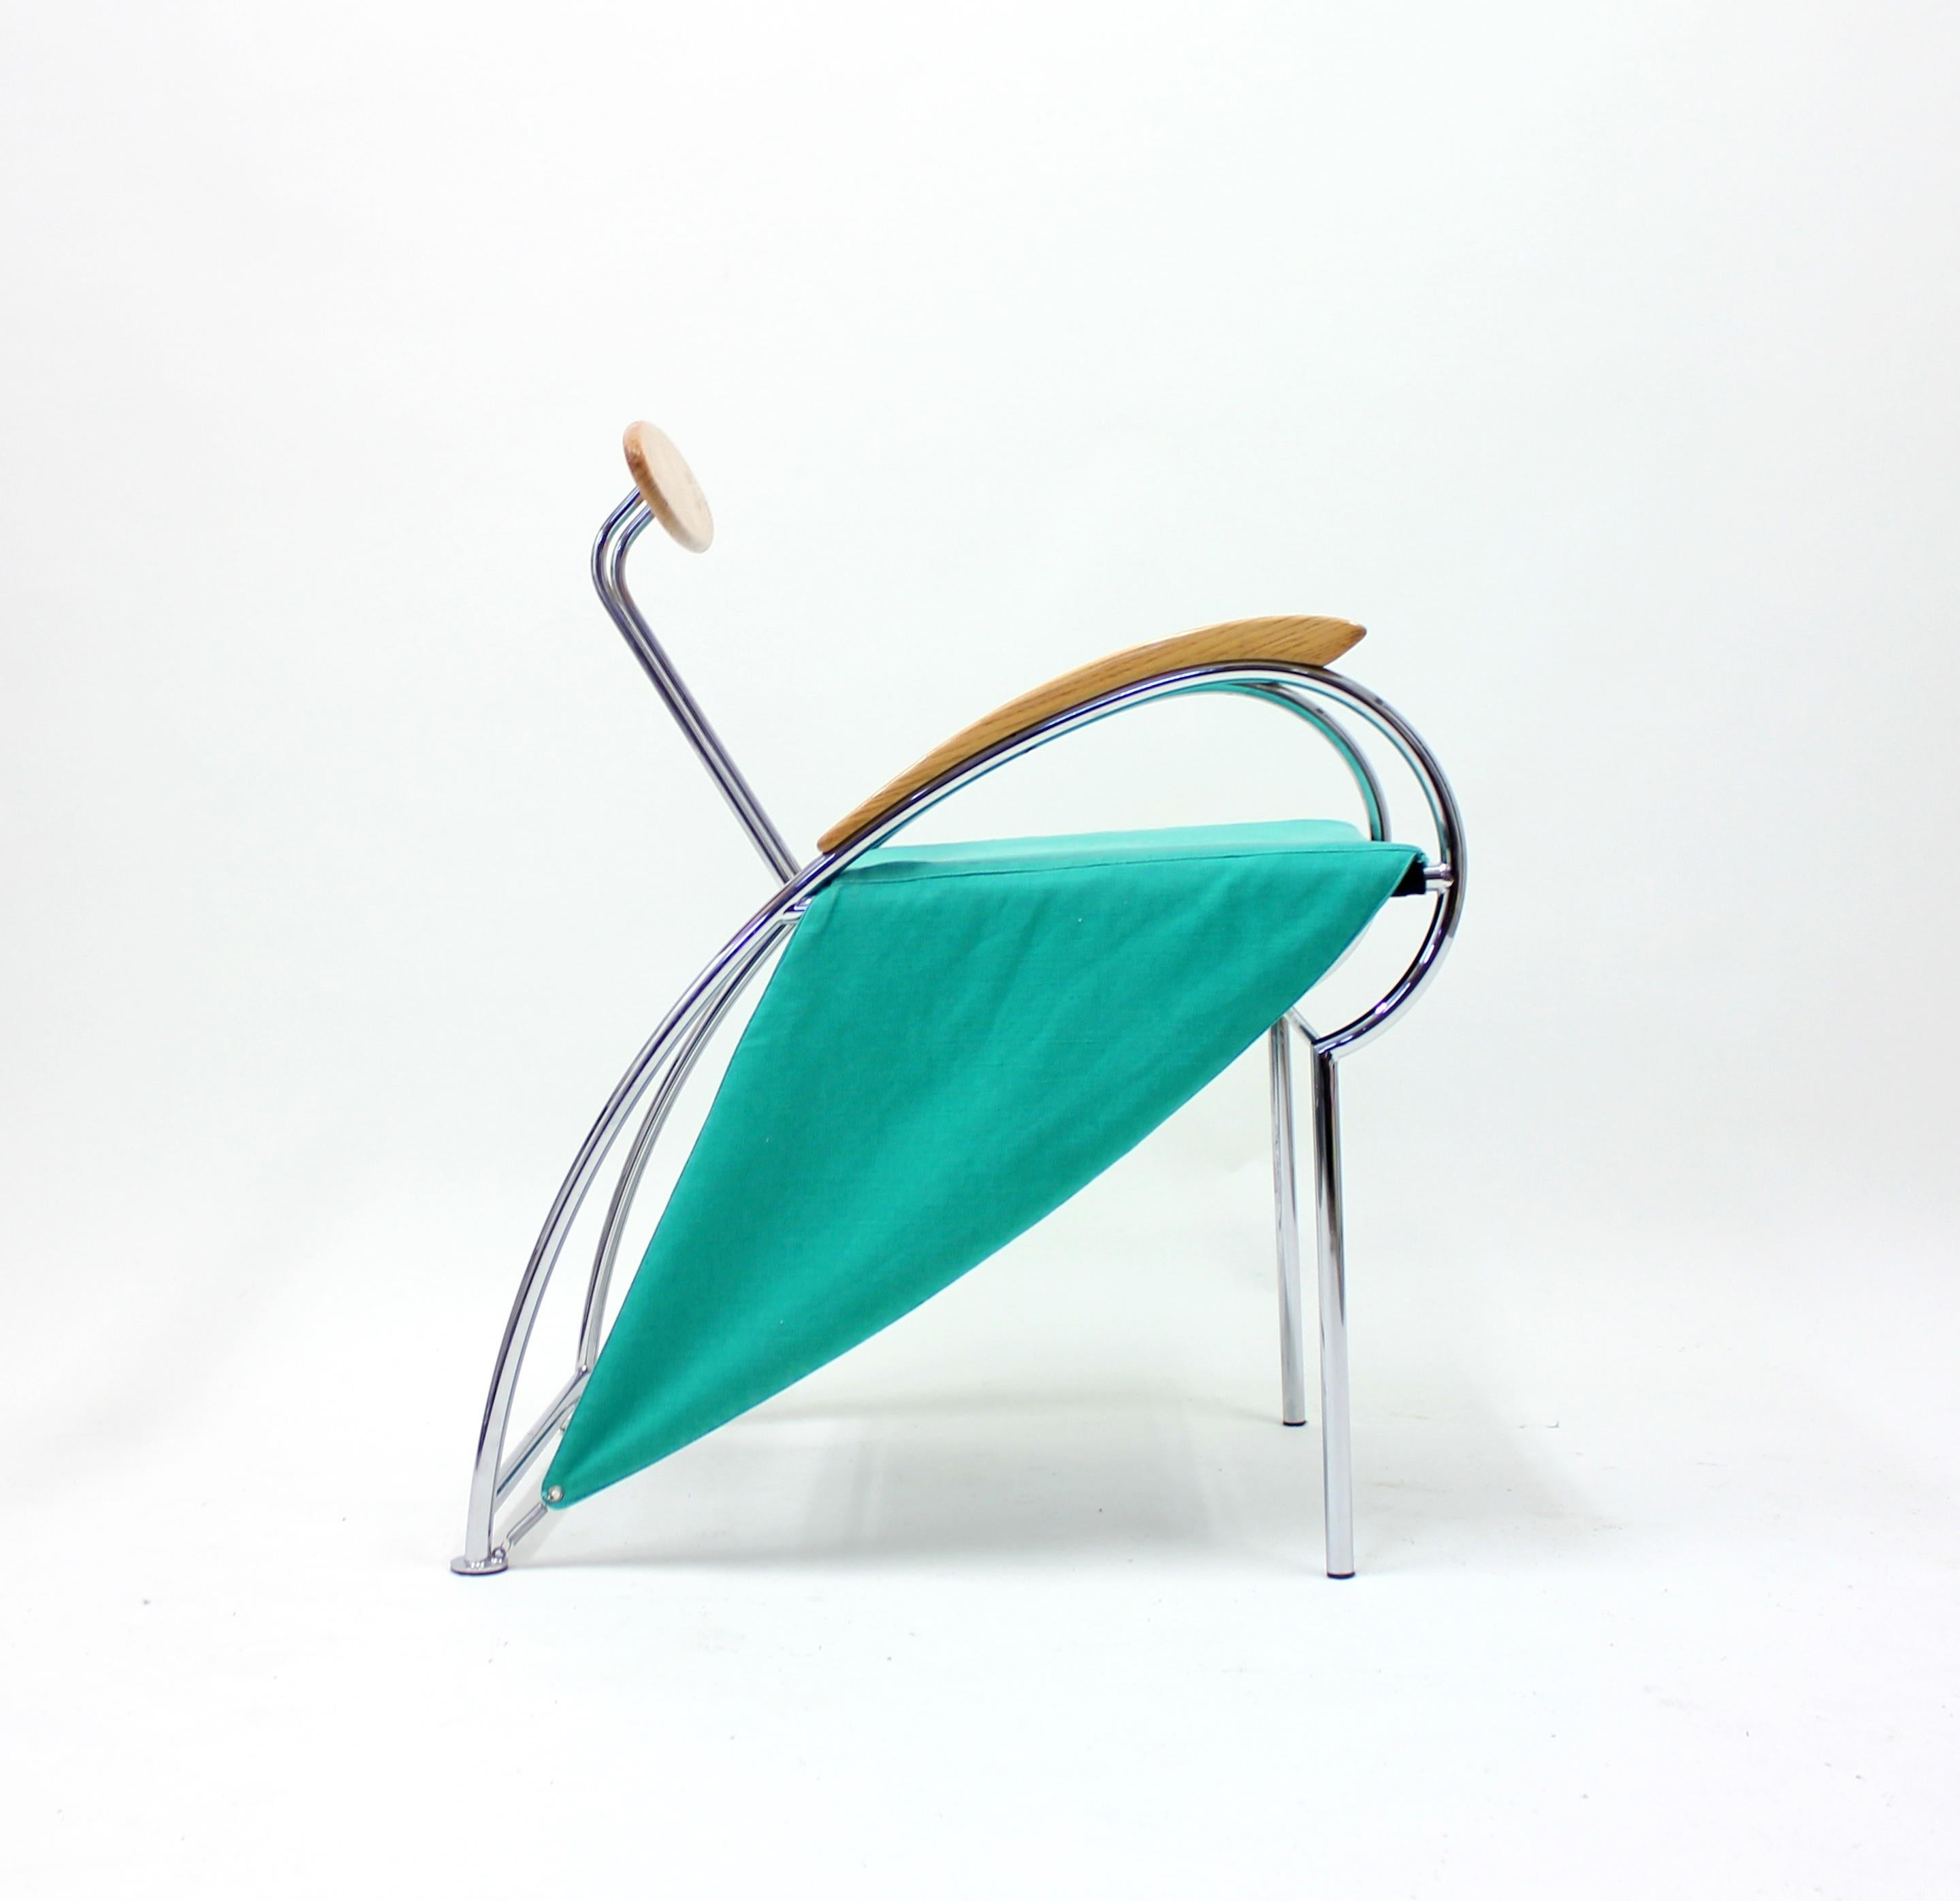 Fabric Notorious Chair by Massimo Iosa Ghini for Moroso, 1988